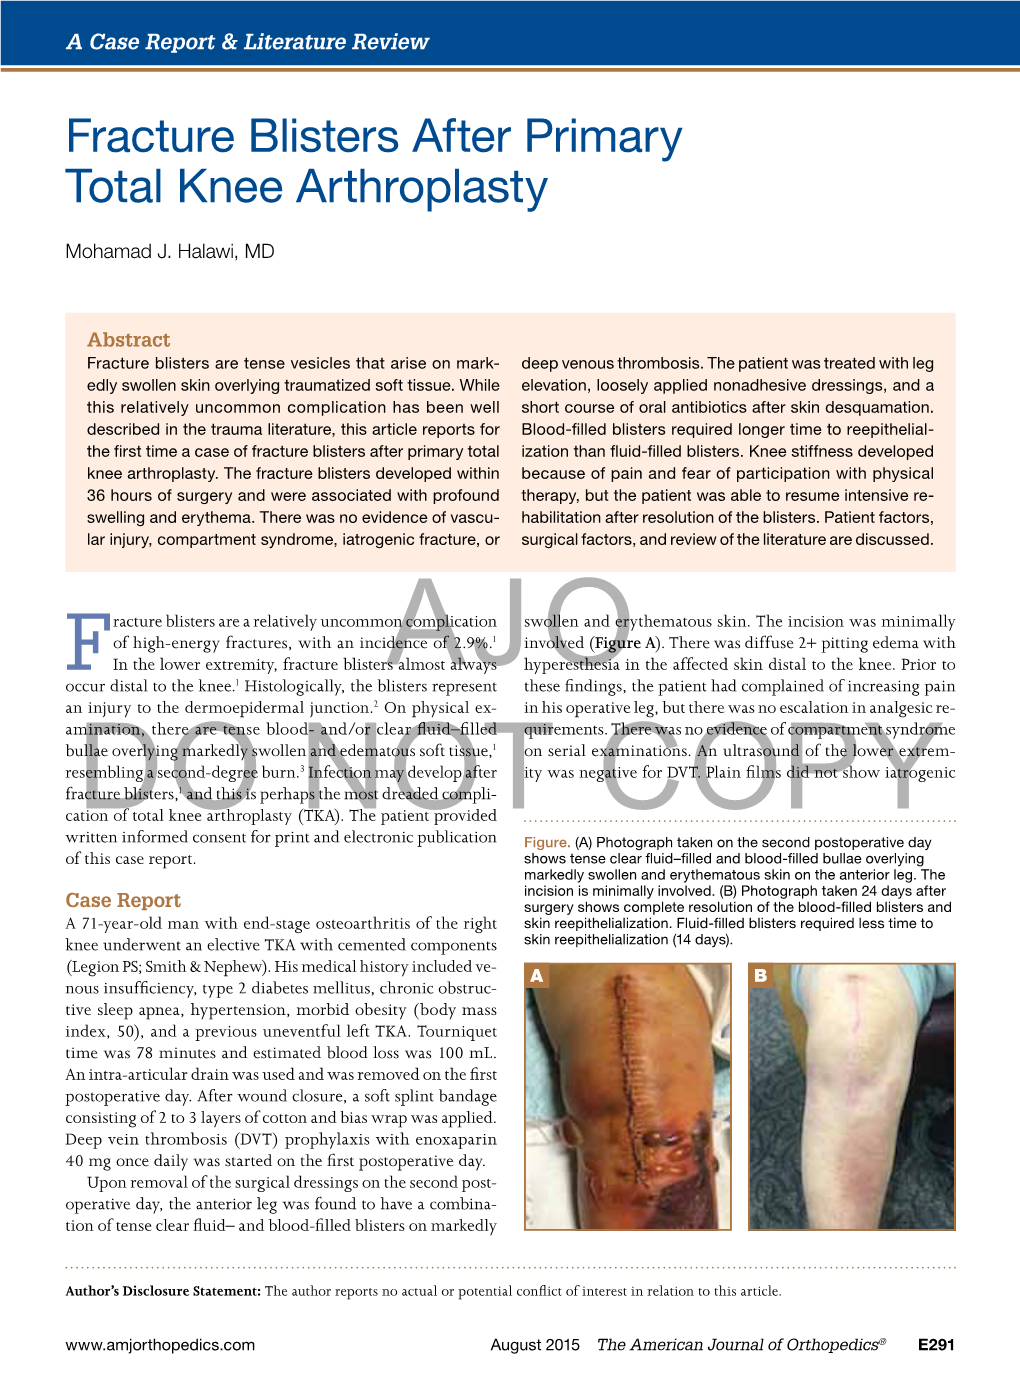 Fracture Blisters After Primary Total Knee Arthroplasty